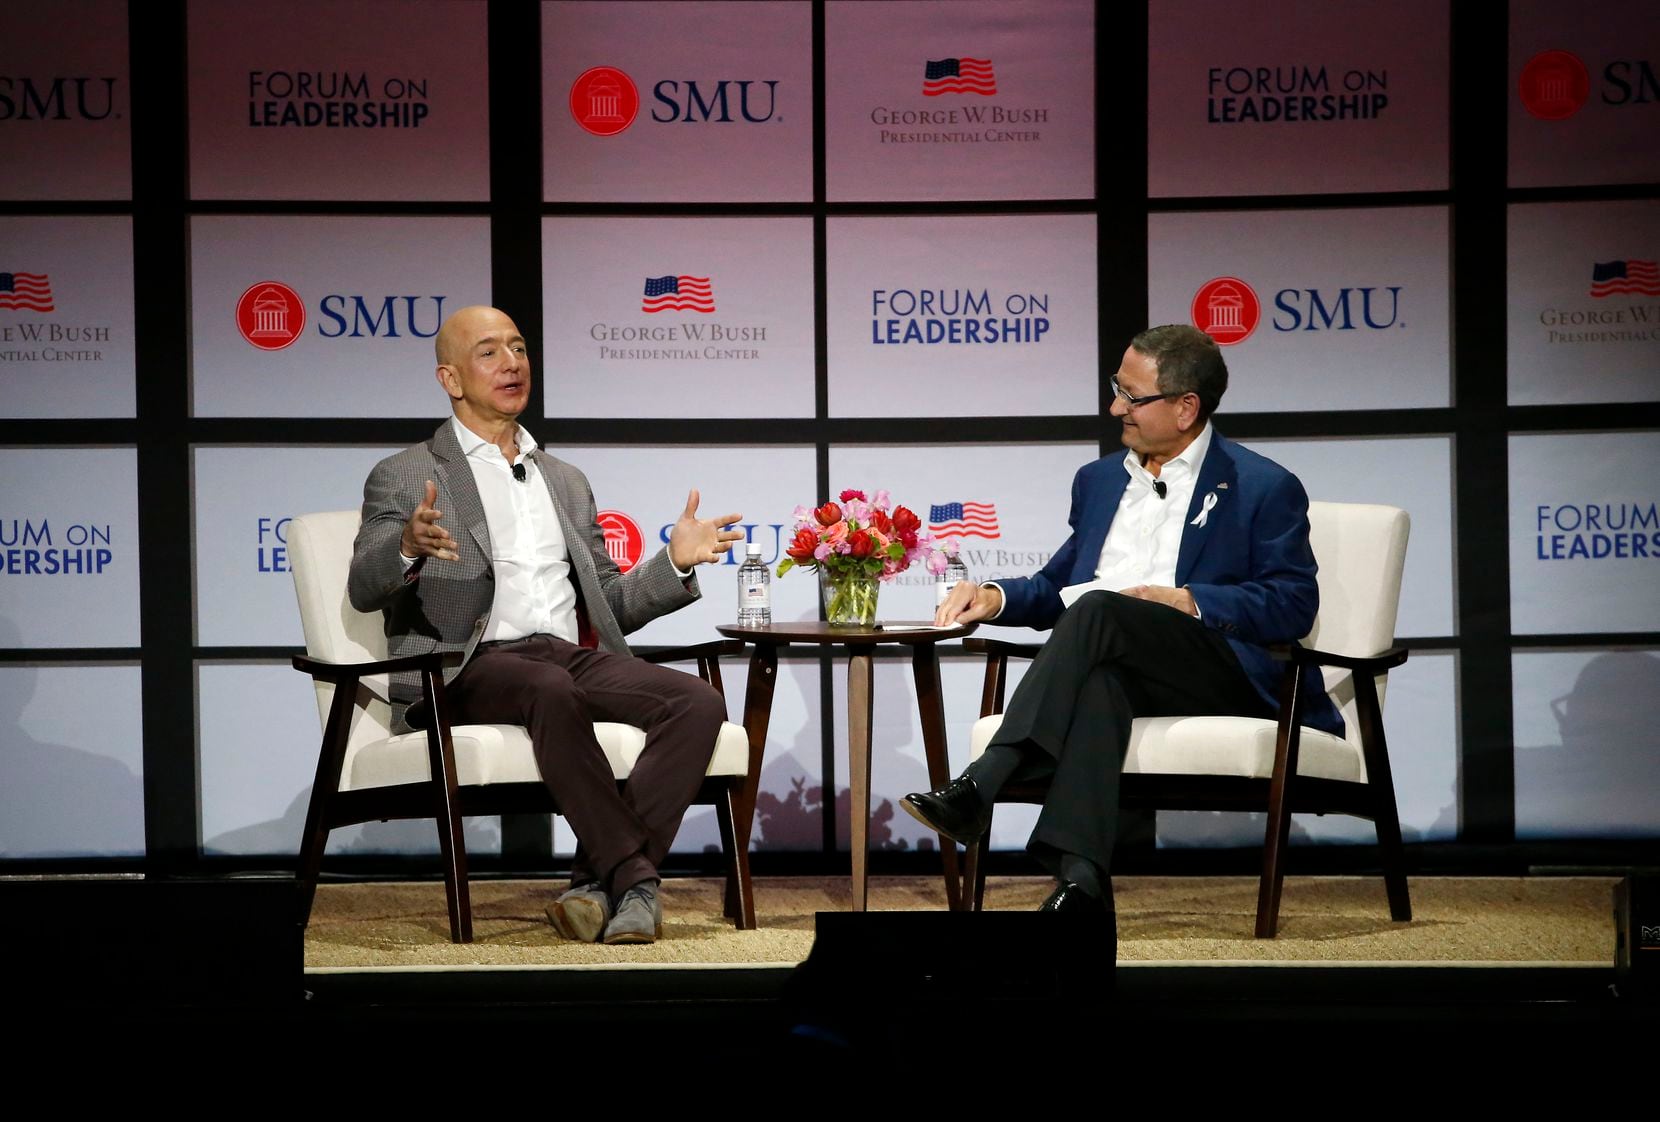 Ken Hersh, president and CEO of the George W. Bush Presidential Center (right), talks with Amazon founder Jeff Bezos at the center's Forum on Leadership in 2018 in Dallas.